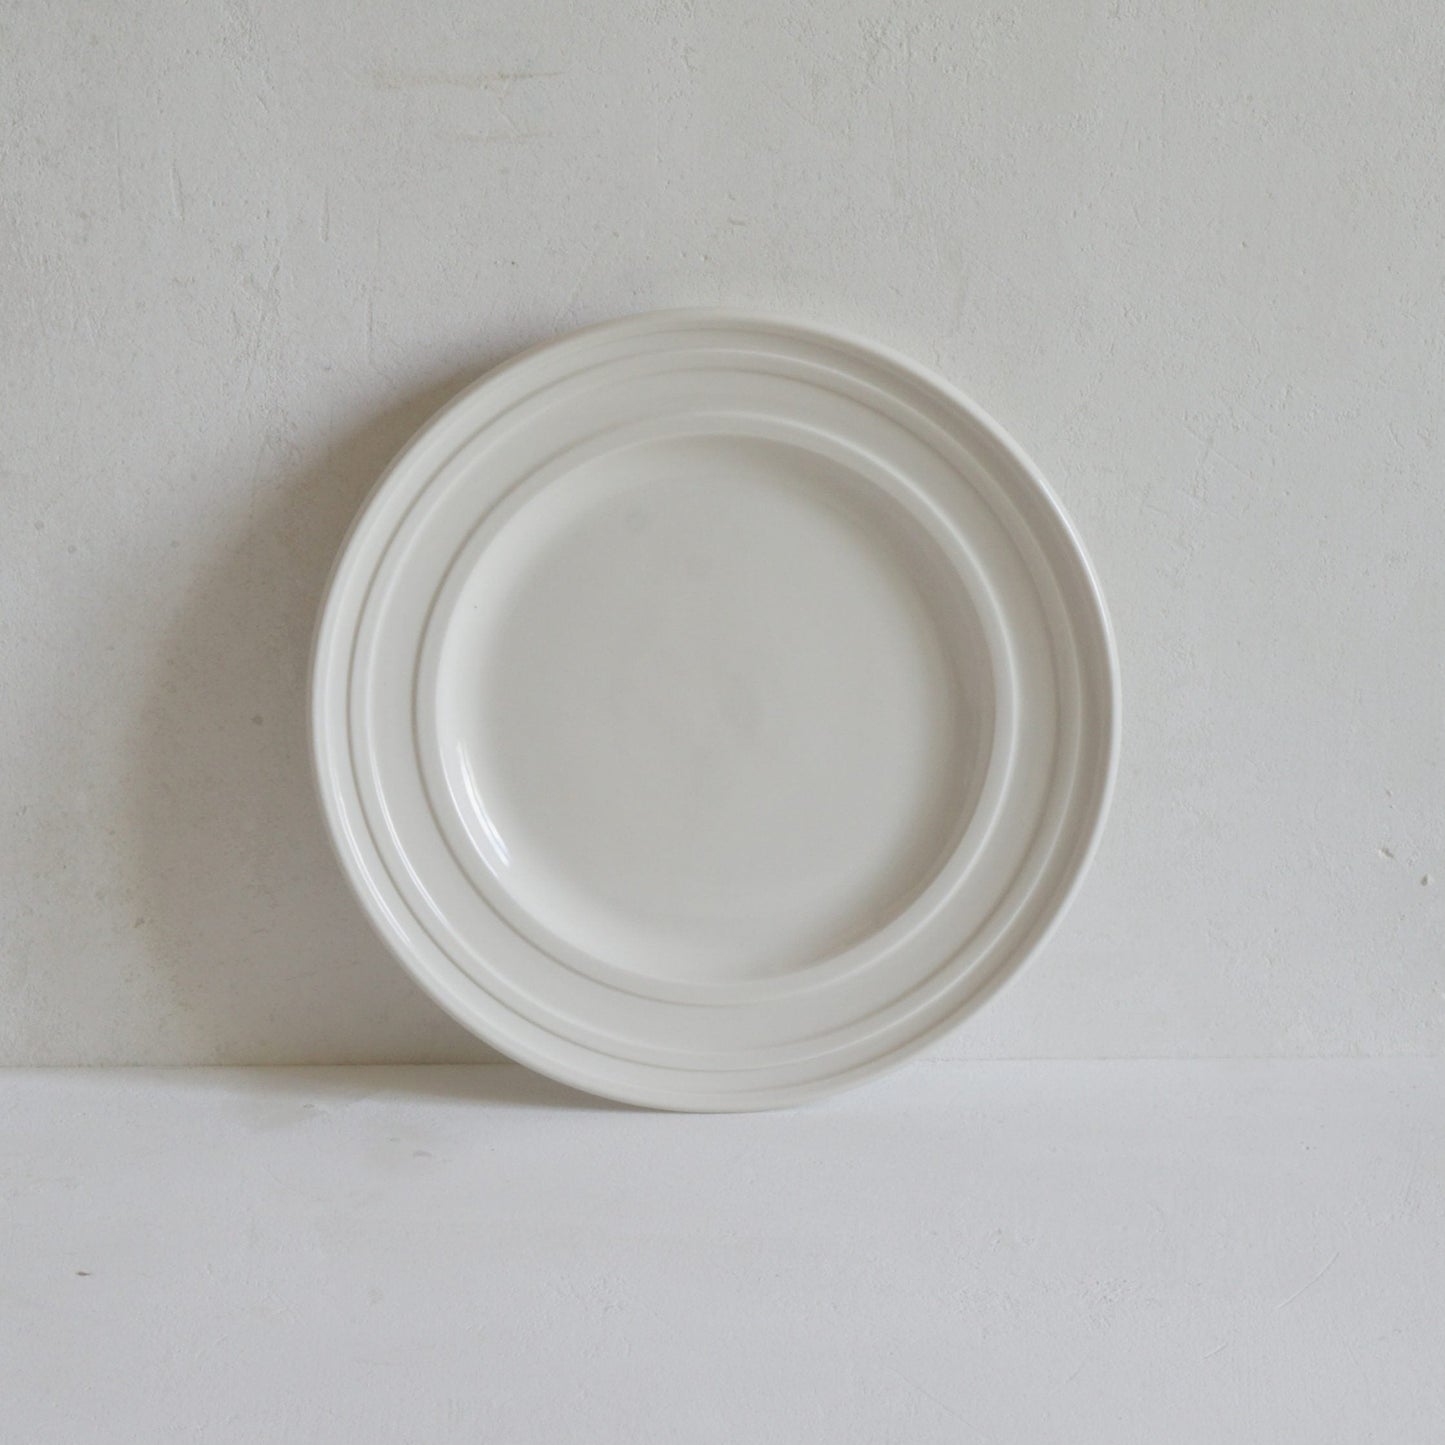 Classical Side Plate with Art Deco lines